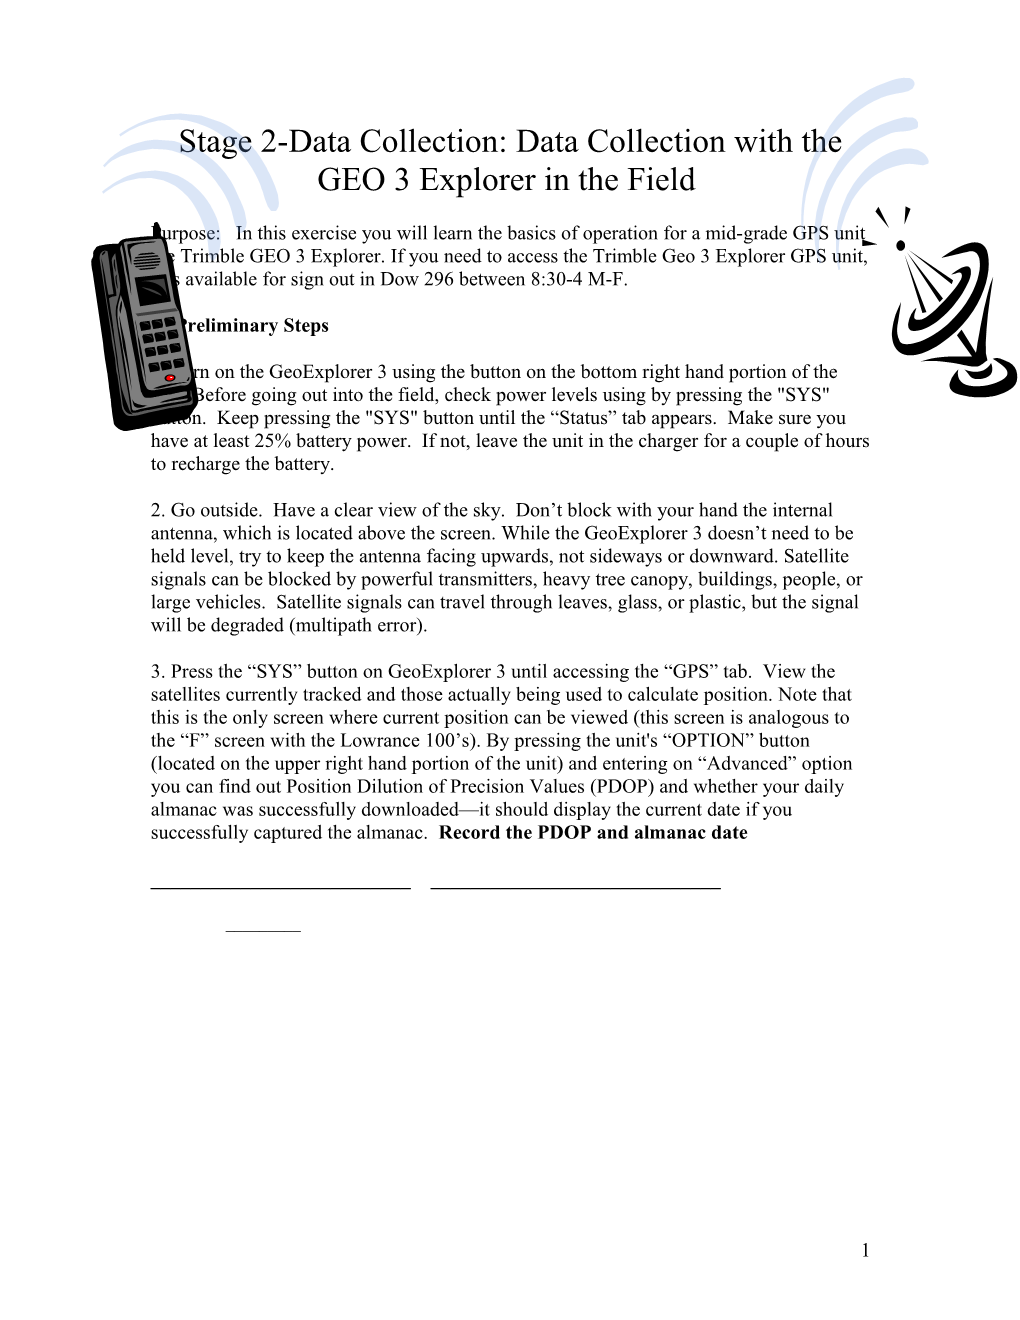 Stage 2-Data Collection: Configuring the GEO 3 Explorer and Data Collection in the Field